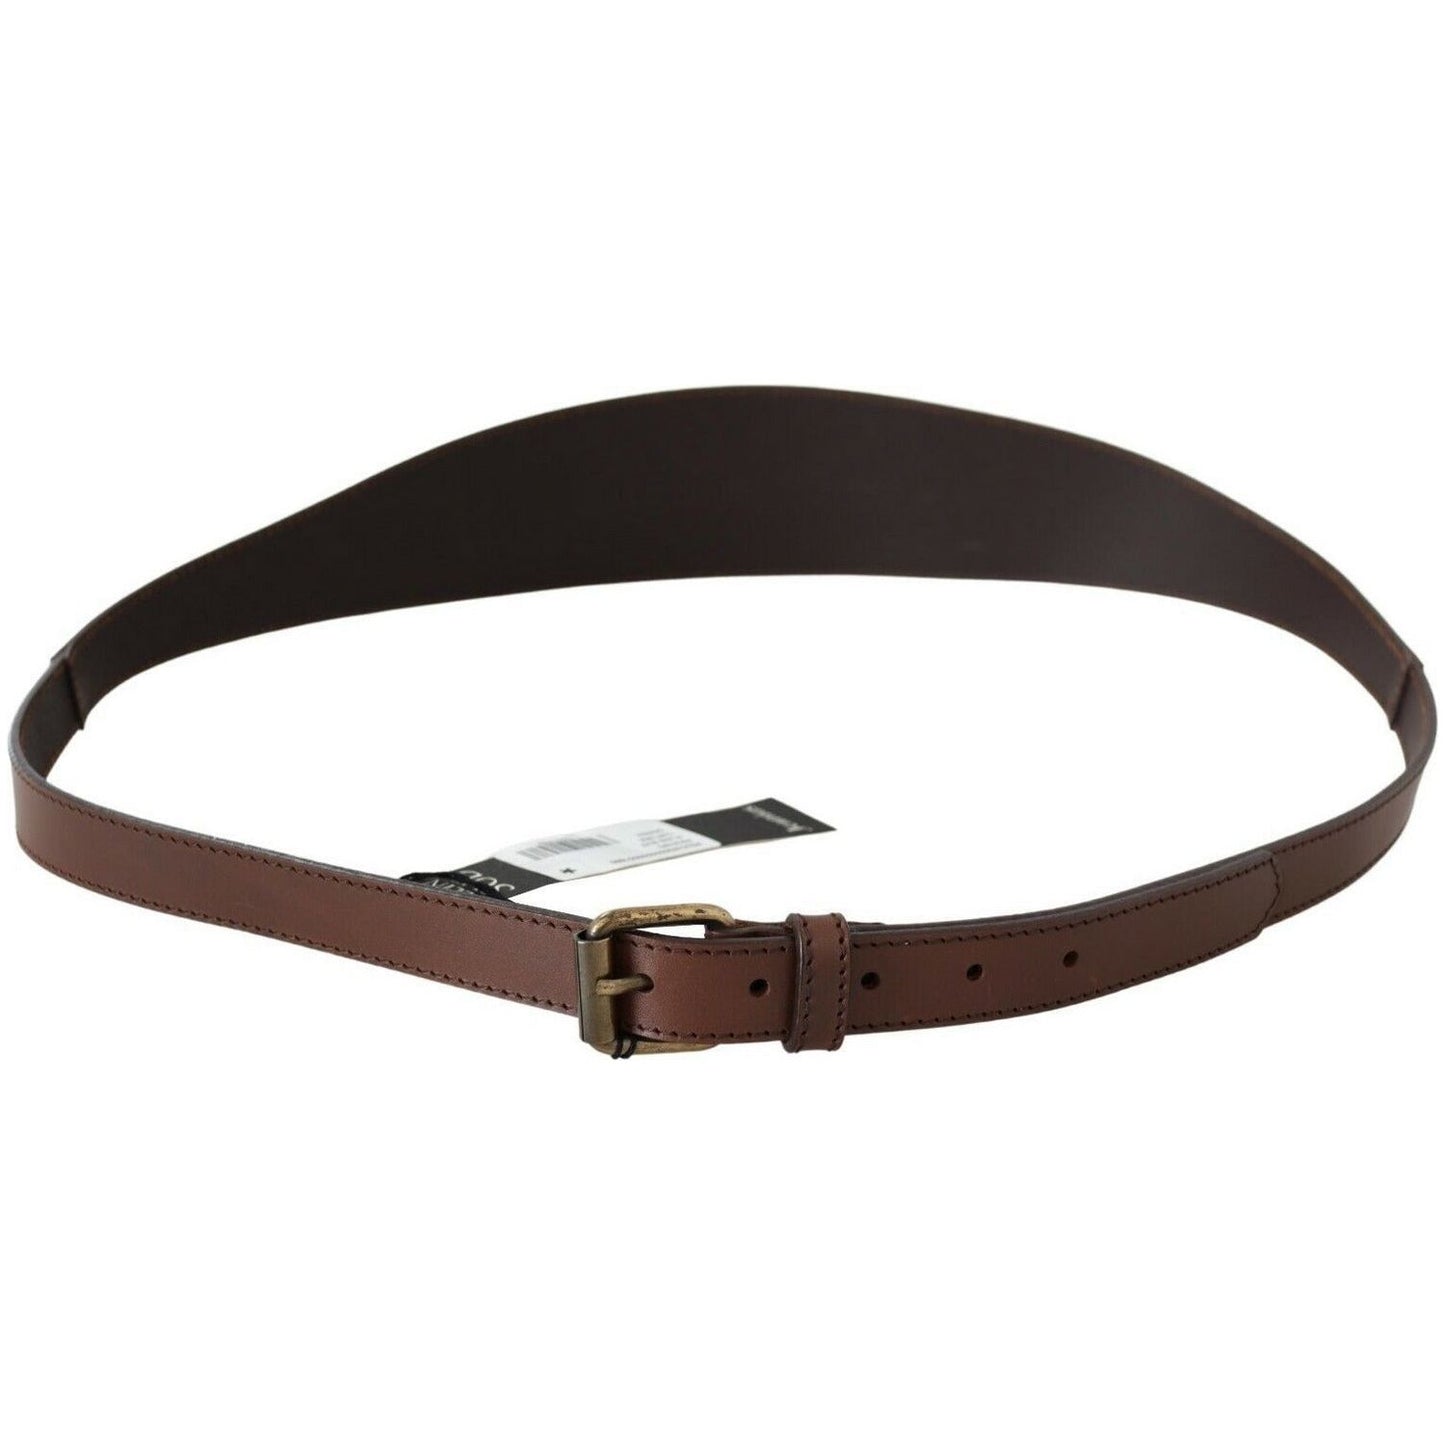 PLEIN SUD Chic Brown Leather Fashion Belt with Bronze-Tone Hardware WOMAN BELTS brown-genuine-leather-rustic-metal-buckle-belt